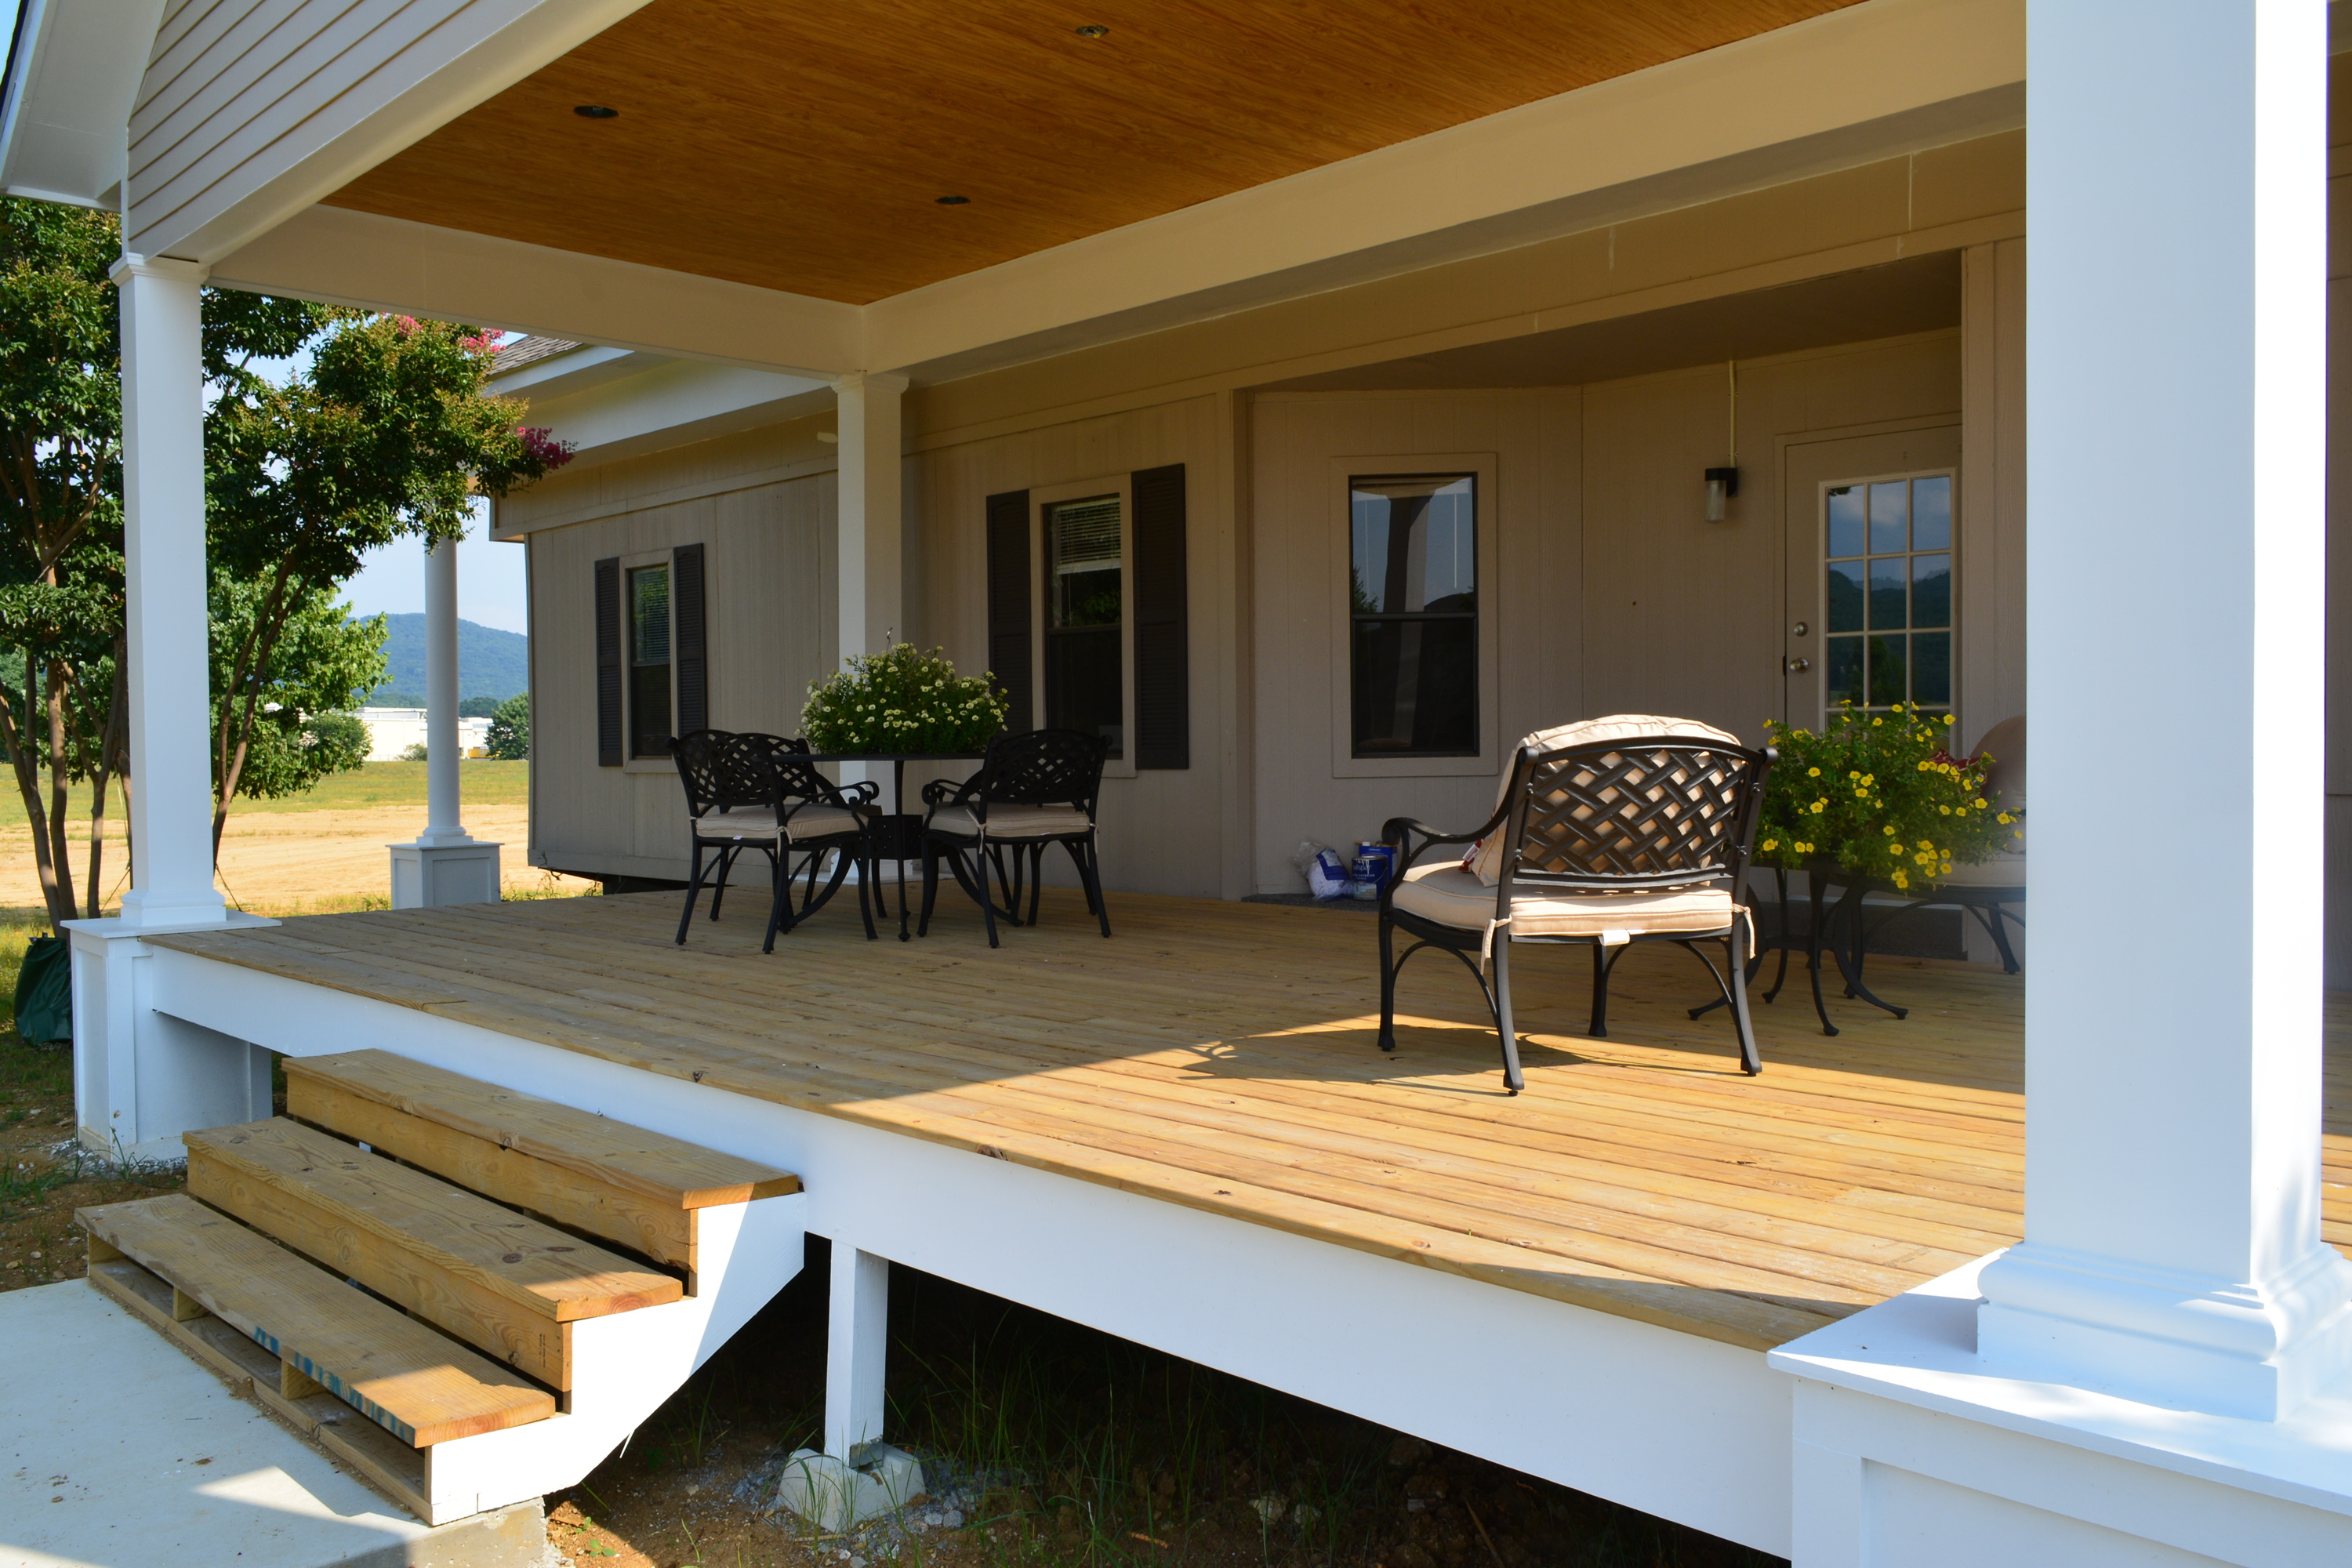 Come rest your feet on our Welcome Center's new Front Porch